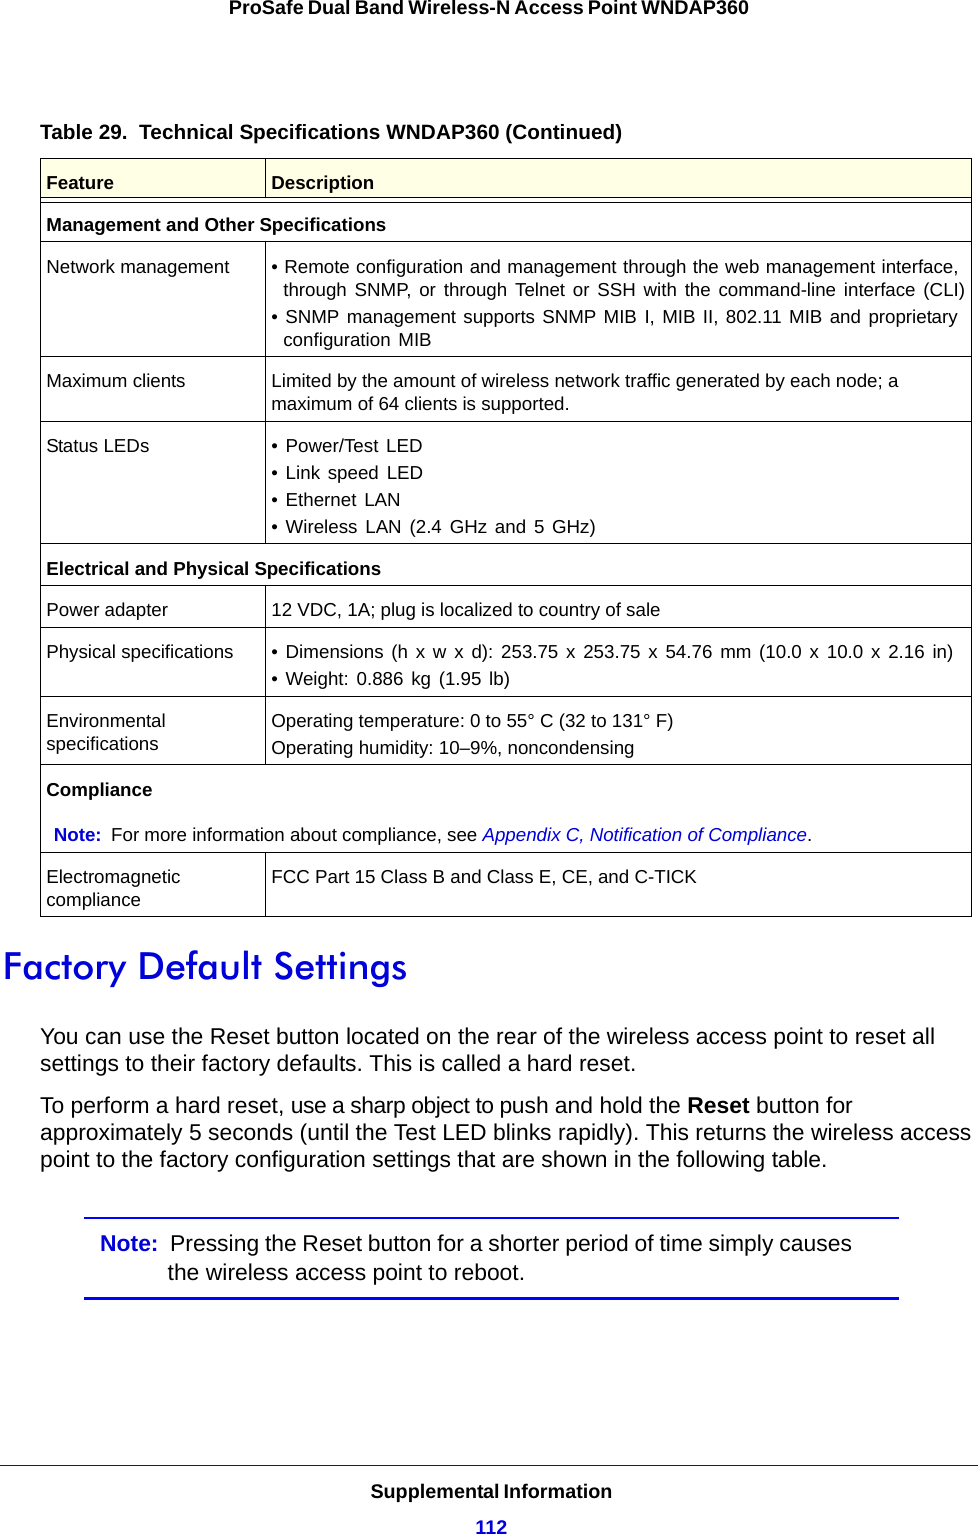 Supplemental Information112ProSafe Dual Band Wireless-N Access Point WNDAP360Factory Default SettingsYou can use the Reset button located on the rear of the wireless access point to reset all settings to their factory defaults. This is called a hard reset. To perform a hard reset, use a sharp object to push and hold the Reset button for approximately 5 seconds (until the Test LED blinks rapidly). This returns the wireless access point to the factory configuration settings that are shown in the following table.Note:  Pressing the Reset button for a shorter period of time simply causes the wireless access point to reboot.Management and Other SpecificationsNetwork management • Remote configuration and management through the web management interface, through SNMP, or through Telnet or SSH with the command-line interface (CLI)• SNMP management supports SNMP MIB I, MIB II, 802.11 MIB and proprietary configuration MIBMaximum clients Limited by the amount of wireless network traffic generated by each node; a maximum of 64 clients is supported.Status LEDs • Power/Test LED• Link speed LED• Ethernet LAN• Wireless LAN (2.4 GHz and 5 GHz)Electrical and Physical SpecificationsPower adapter 12 VDC, 1A; plug is localized to country of salePhysical specifications • Dimensions (h x w x d): 253.75 x 253.75 x 54.76 mm (10.0 x 10.0 x 2.16 in)• Weight: 0.886 kg (1.95 lb)Environmental specificationsOperating temperature: 0 to 55° C (32 to 131° F)Operating humidity: 10–9%, noncondensingComplianceNote: For more information about compliance, see Appendix C, Notification of Compliance.Electromagnetic complianceFCC Part 15 Class B and Class E, CE, and C-TICKTable 29.  Technical Specifications WNDAP360 (Continued)Feature Description